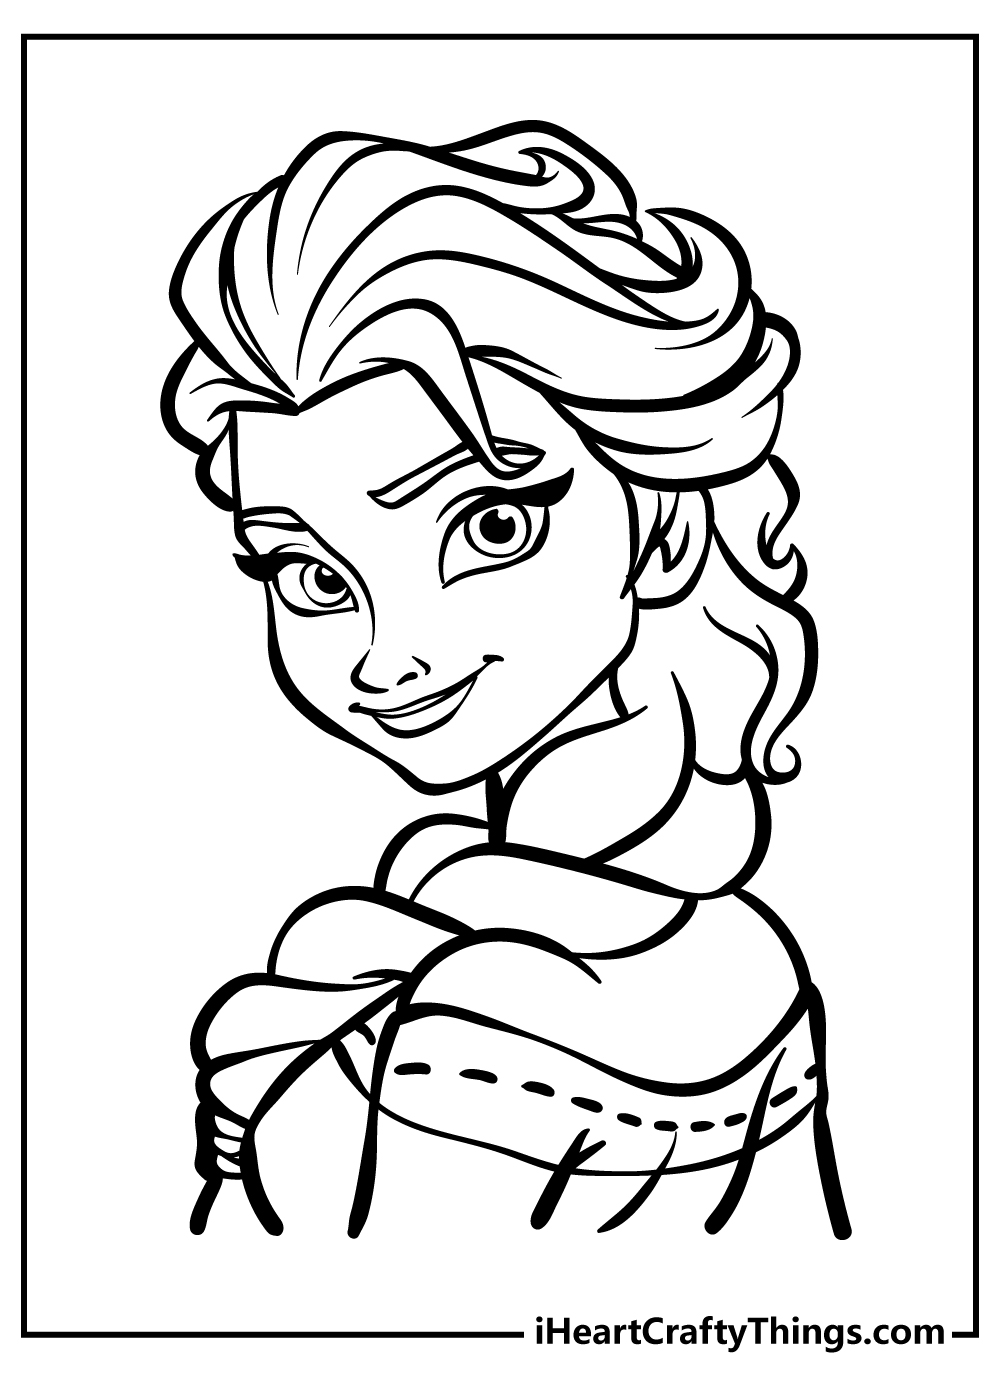 Elsa Coloring Pages for adults free printable